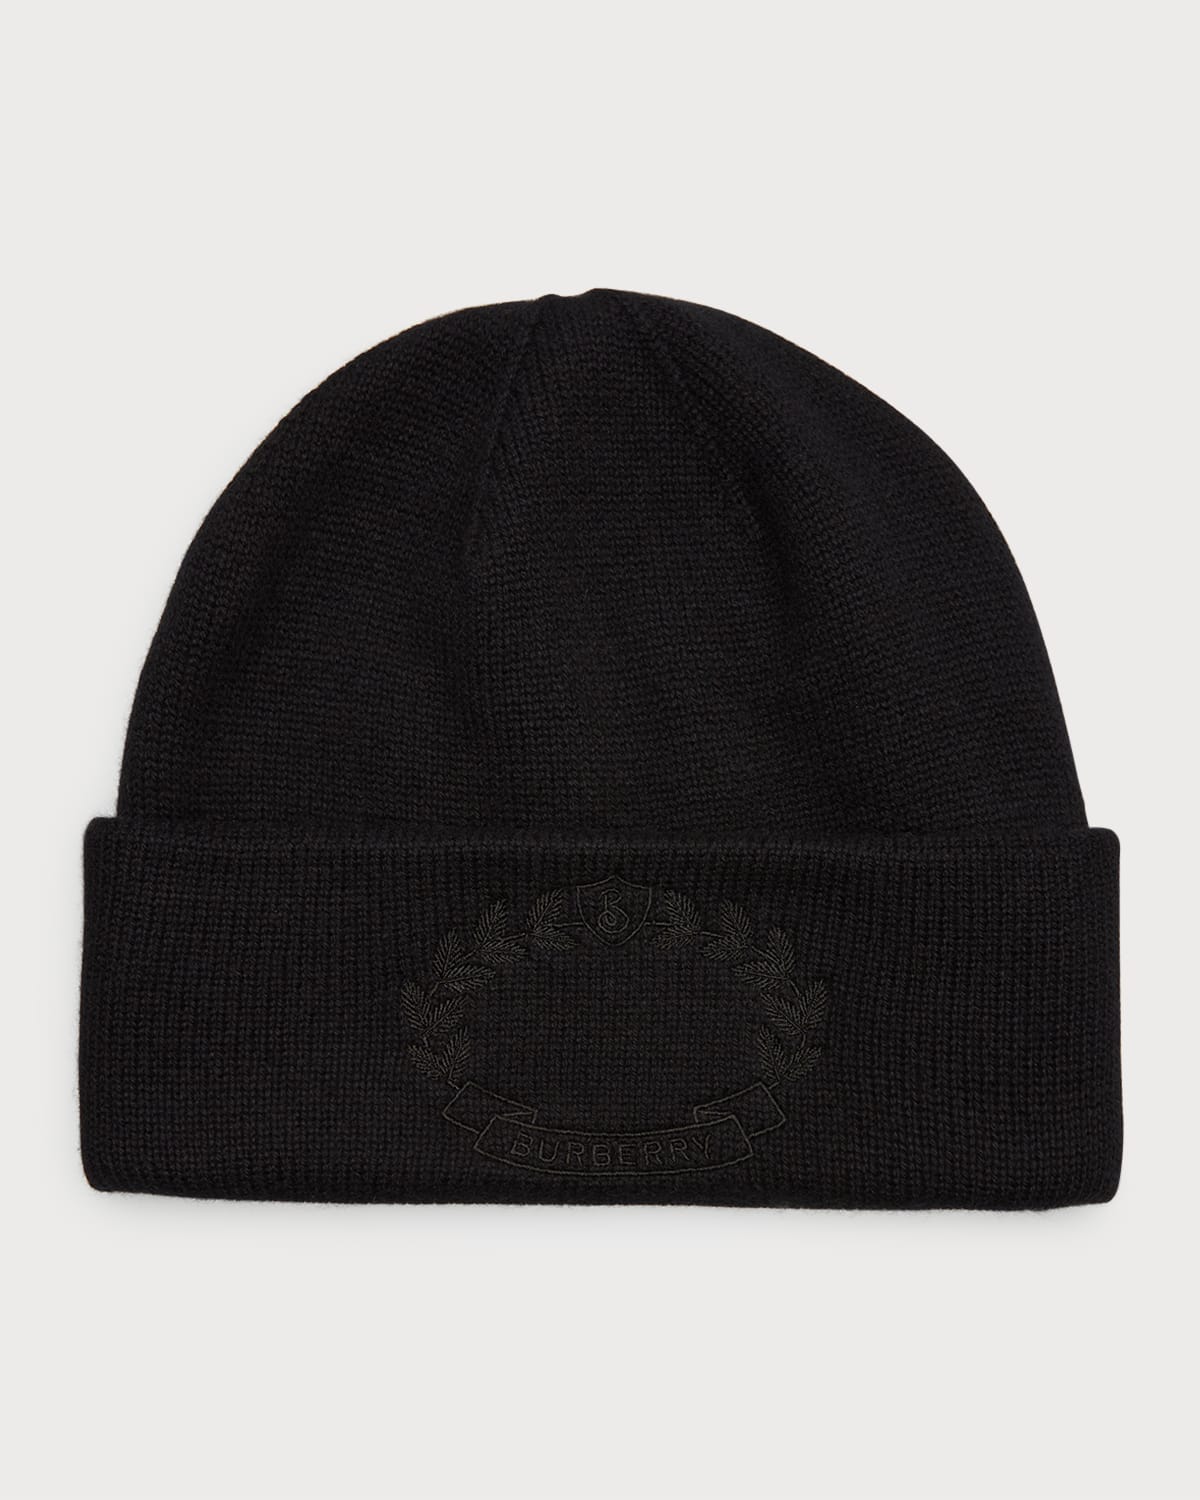 Burberry Ghost Crest Cashmere Beanie In Black